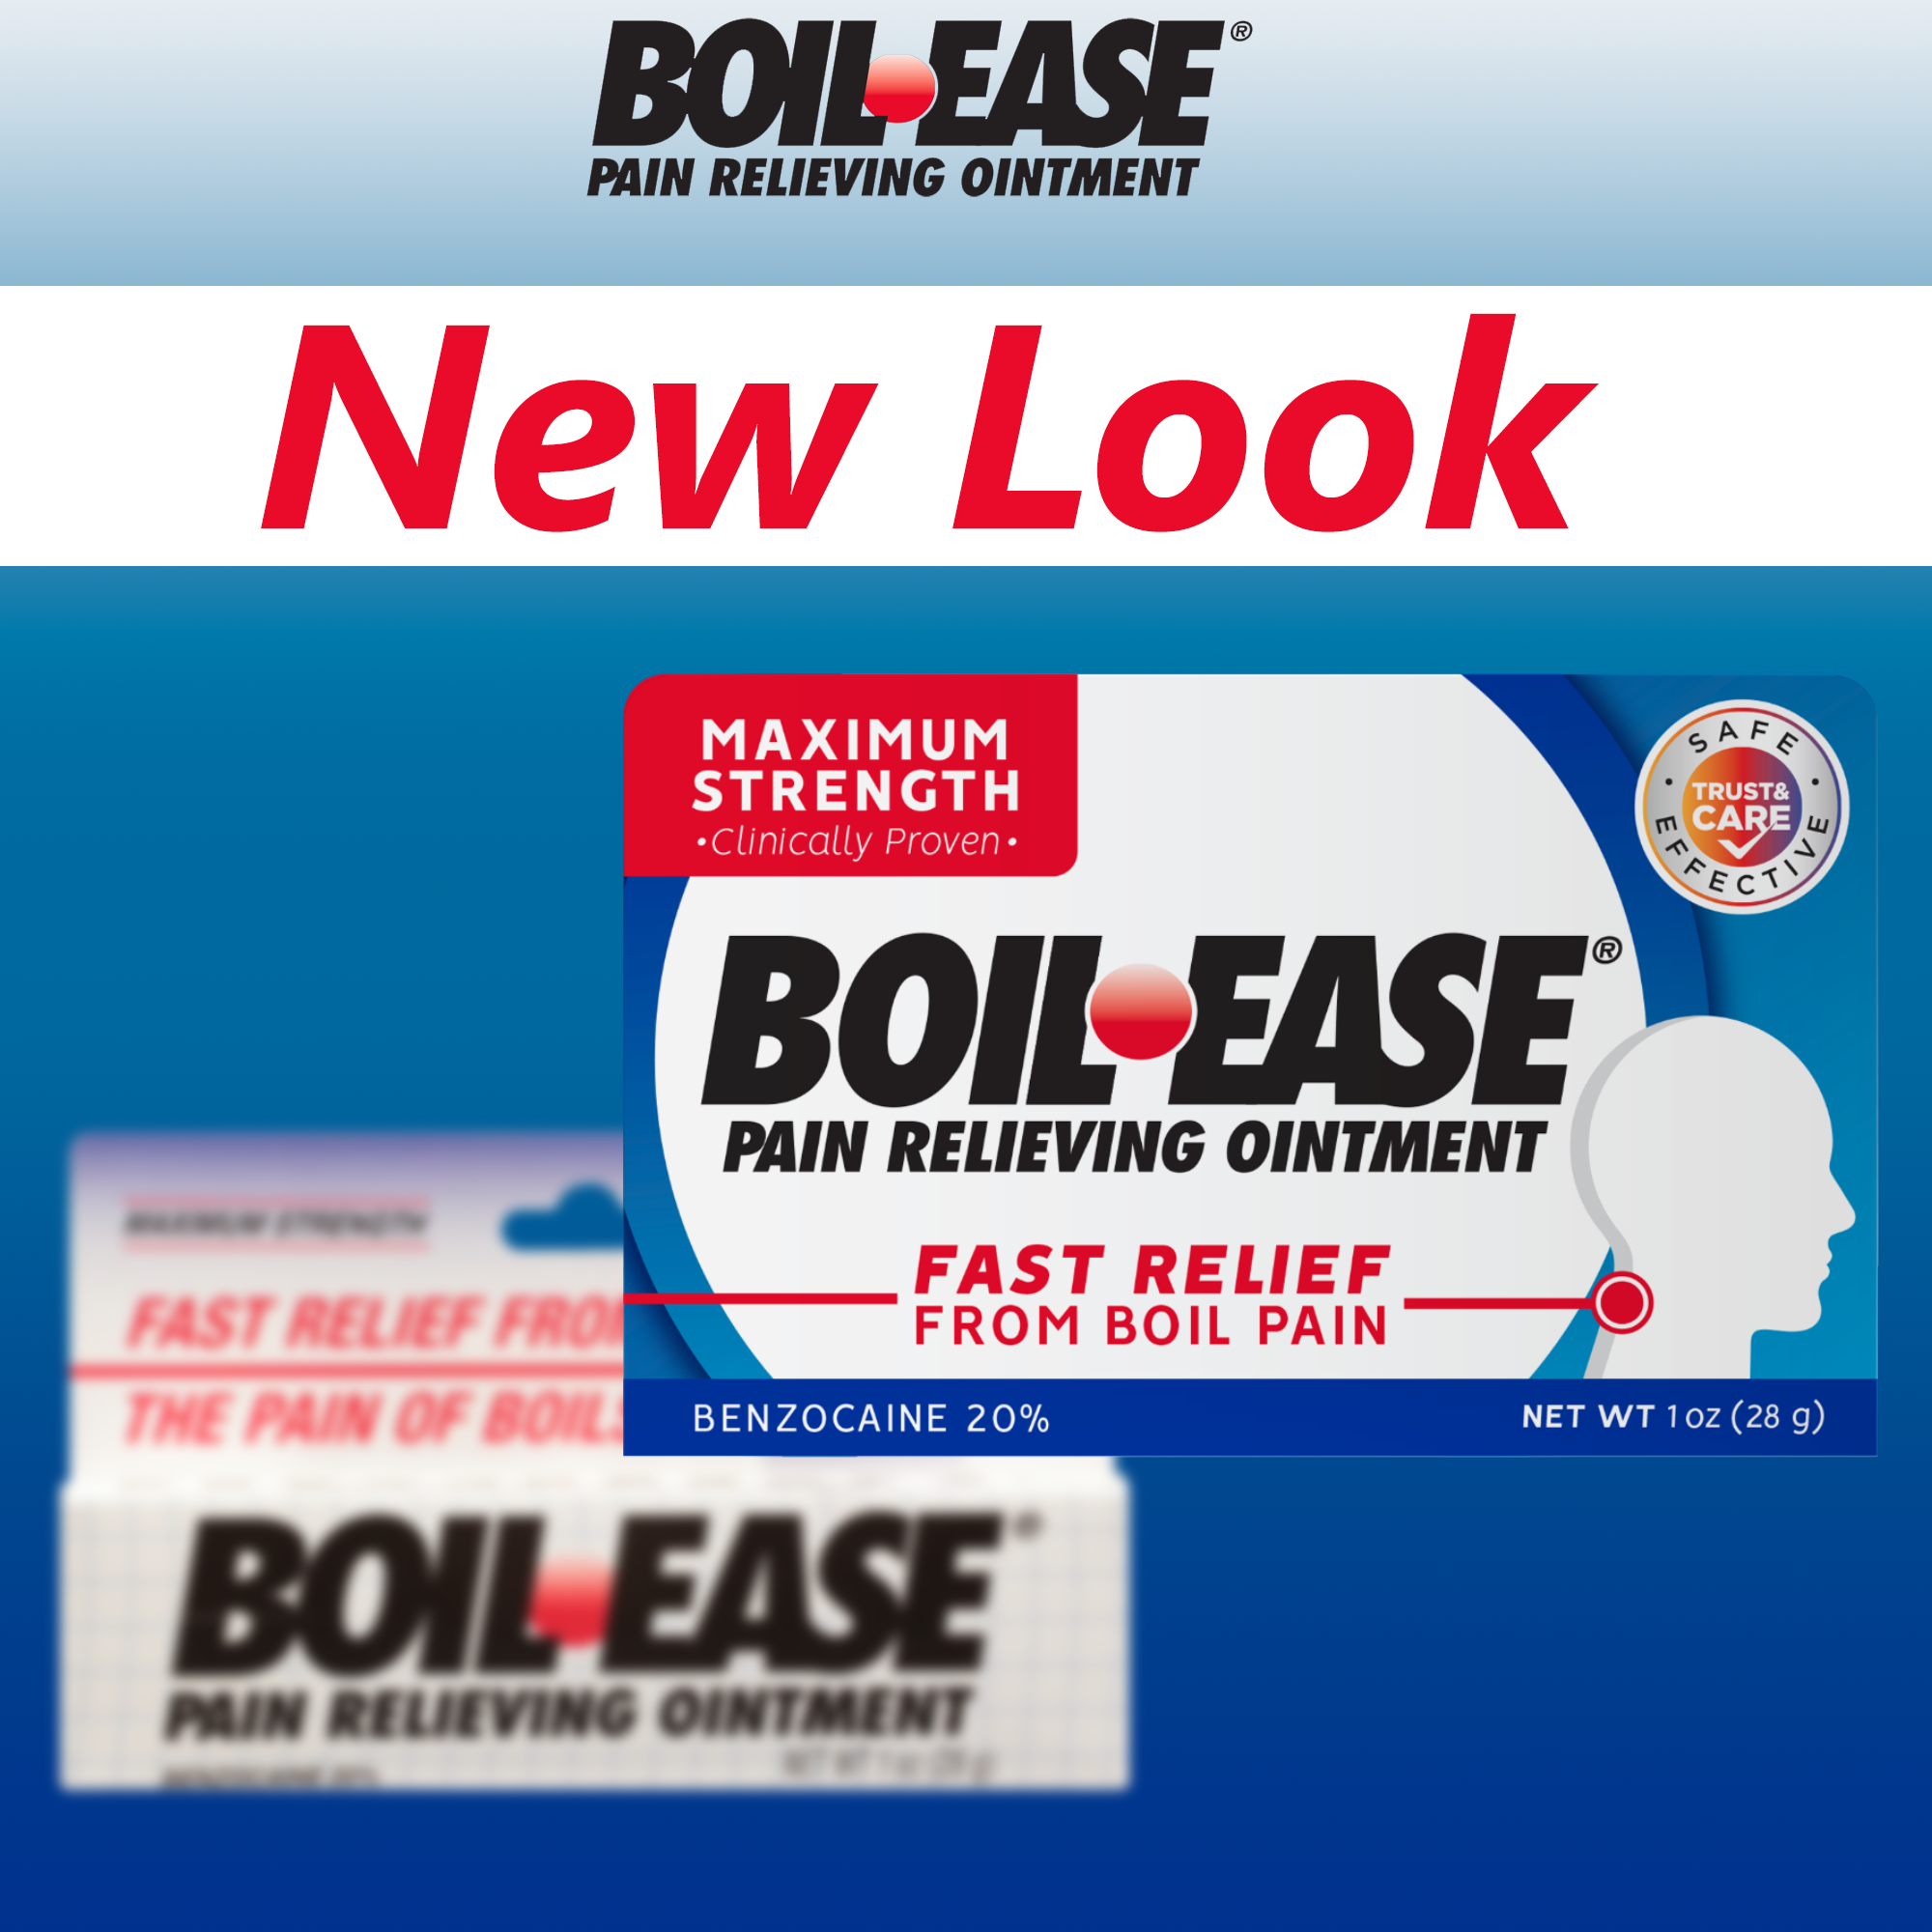 Boil-Ease Maximum Strength Pain Relieving Ointment, 1 Oz - image 2 of 11